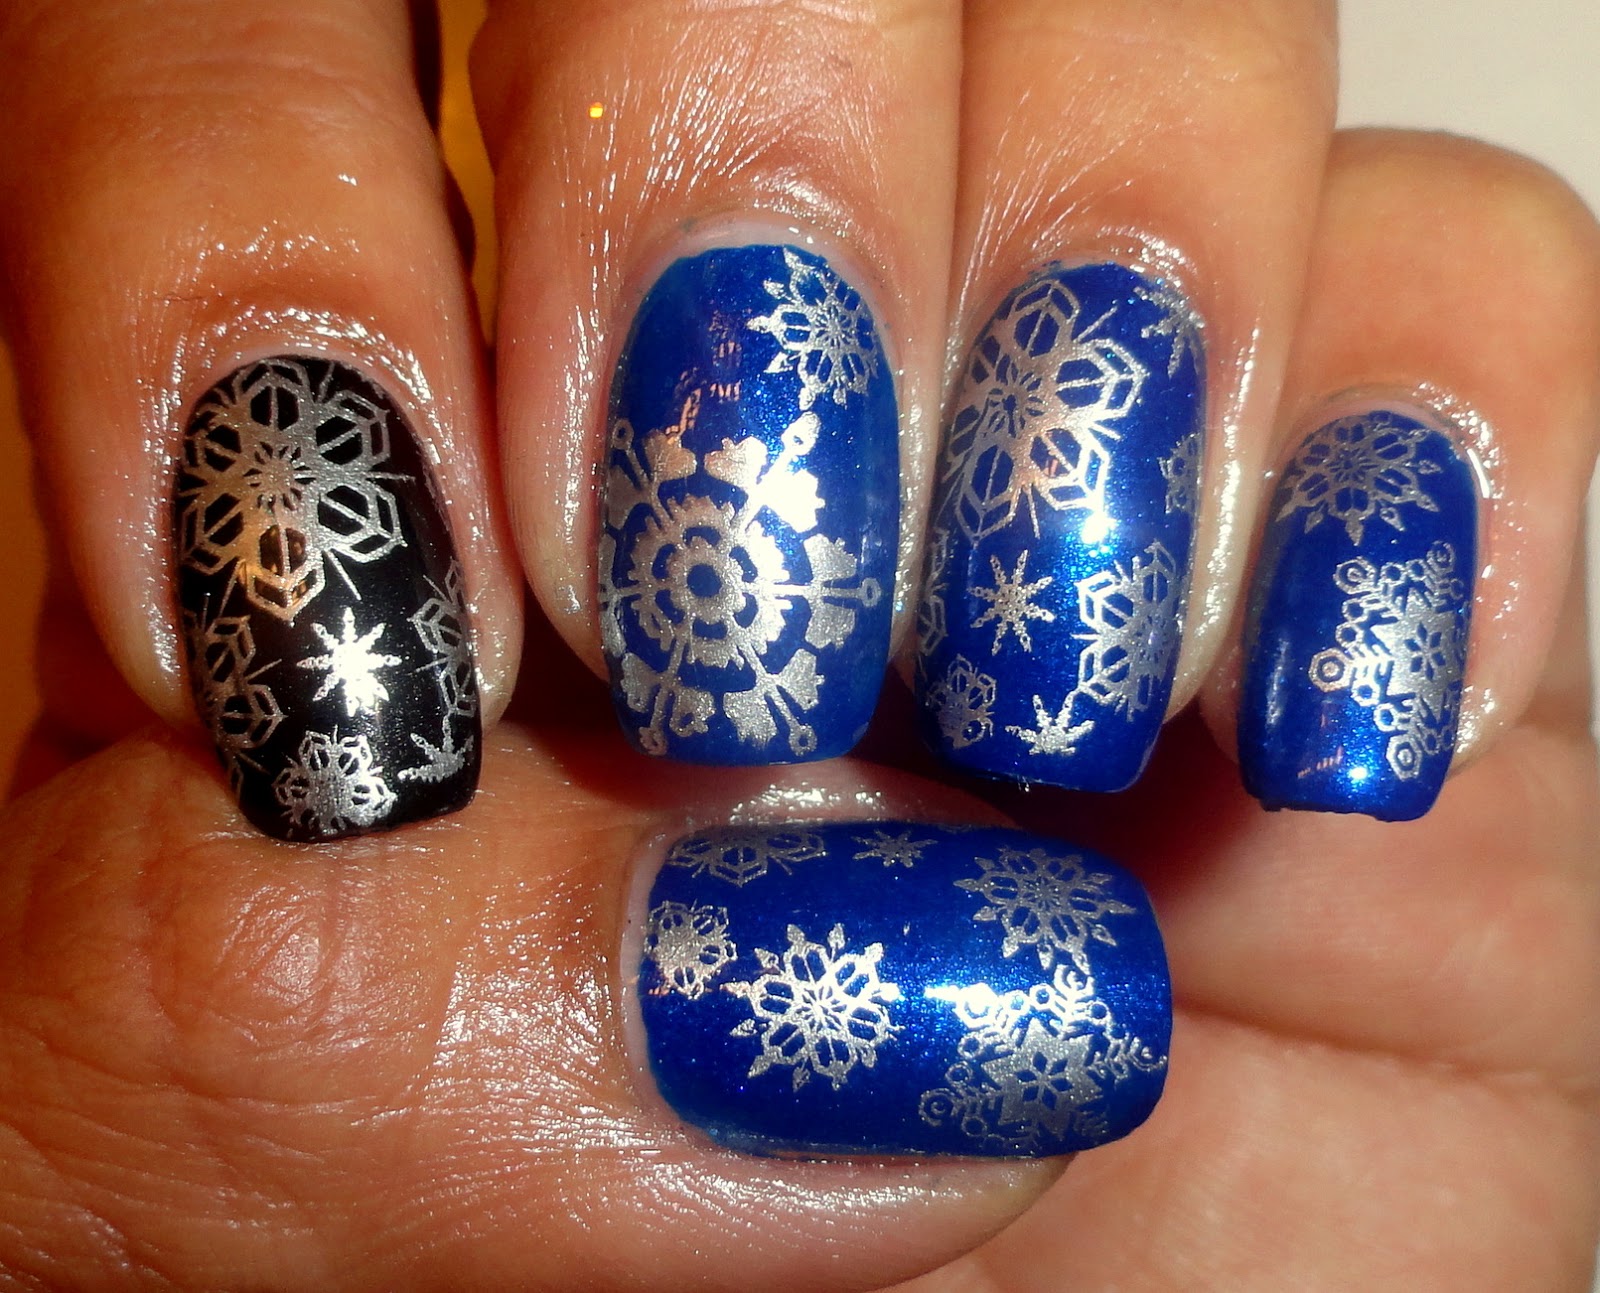 Fancy Schmancy Nails: Day 3, 12 Days of Christmas: Snowflakes!